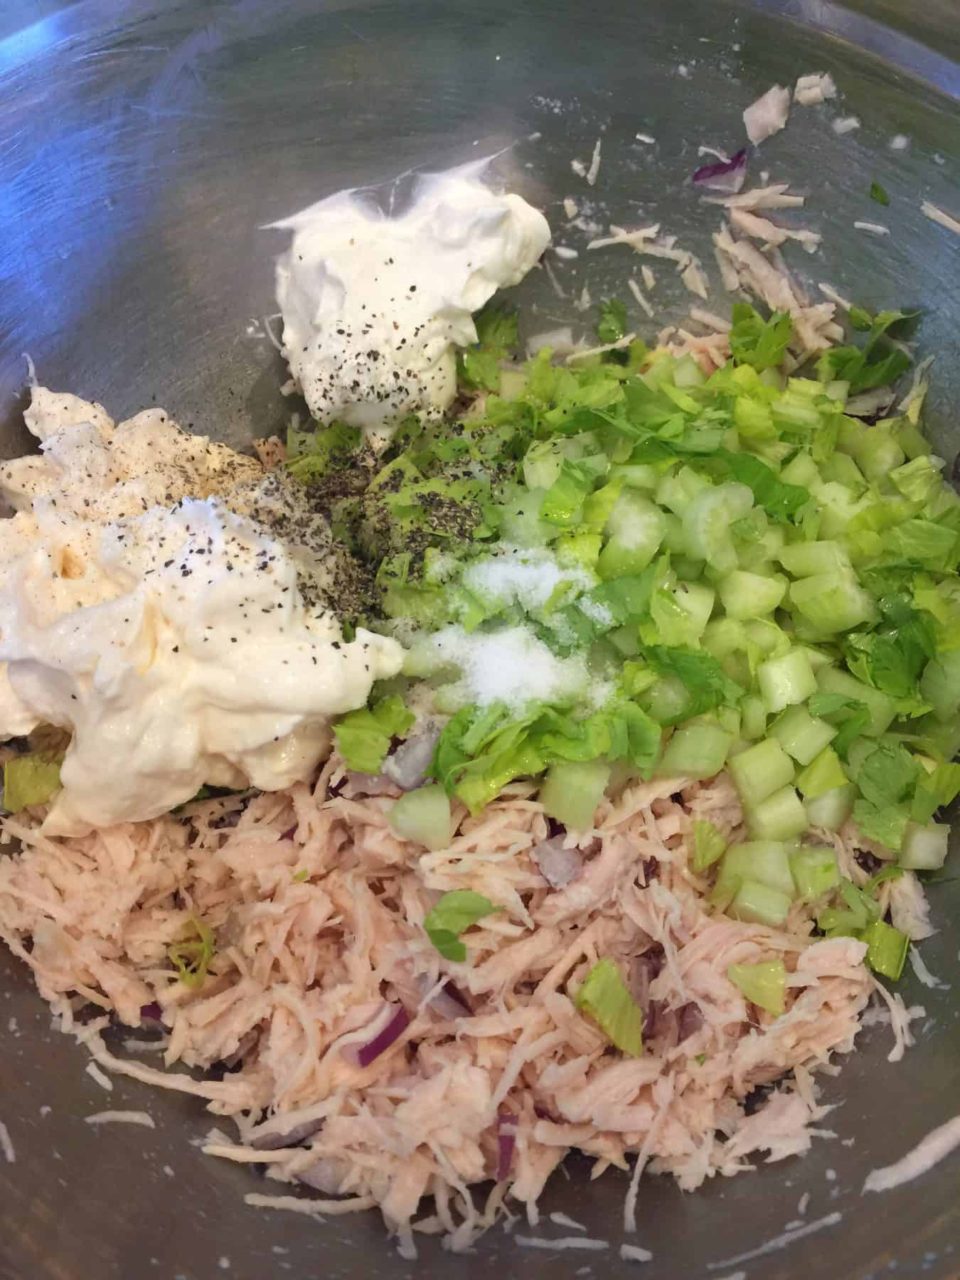 Remaining ingredients added to the bowl for Best Chicken Salad Ever